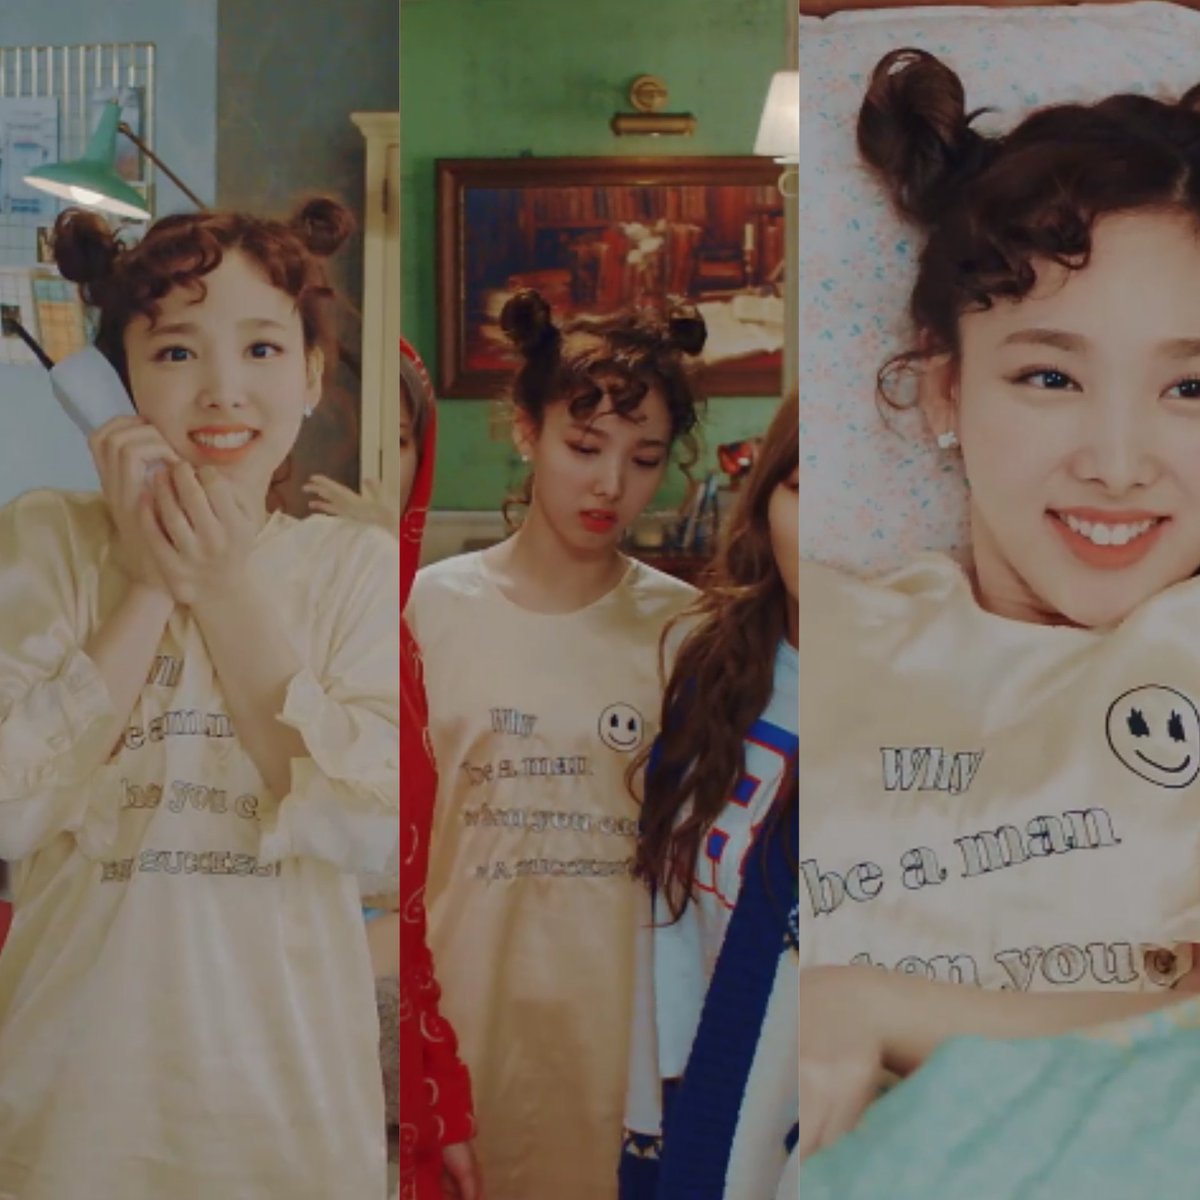 nayeon's "why be a man when you can be a success" shirt. I want it